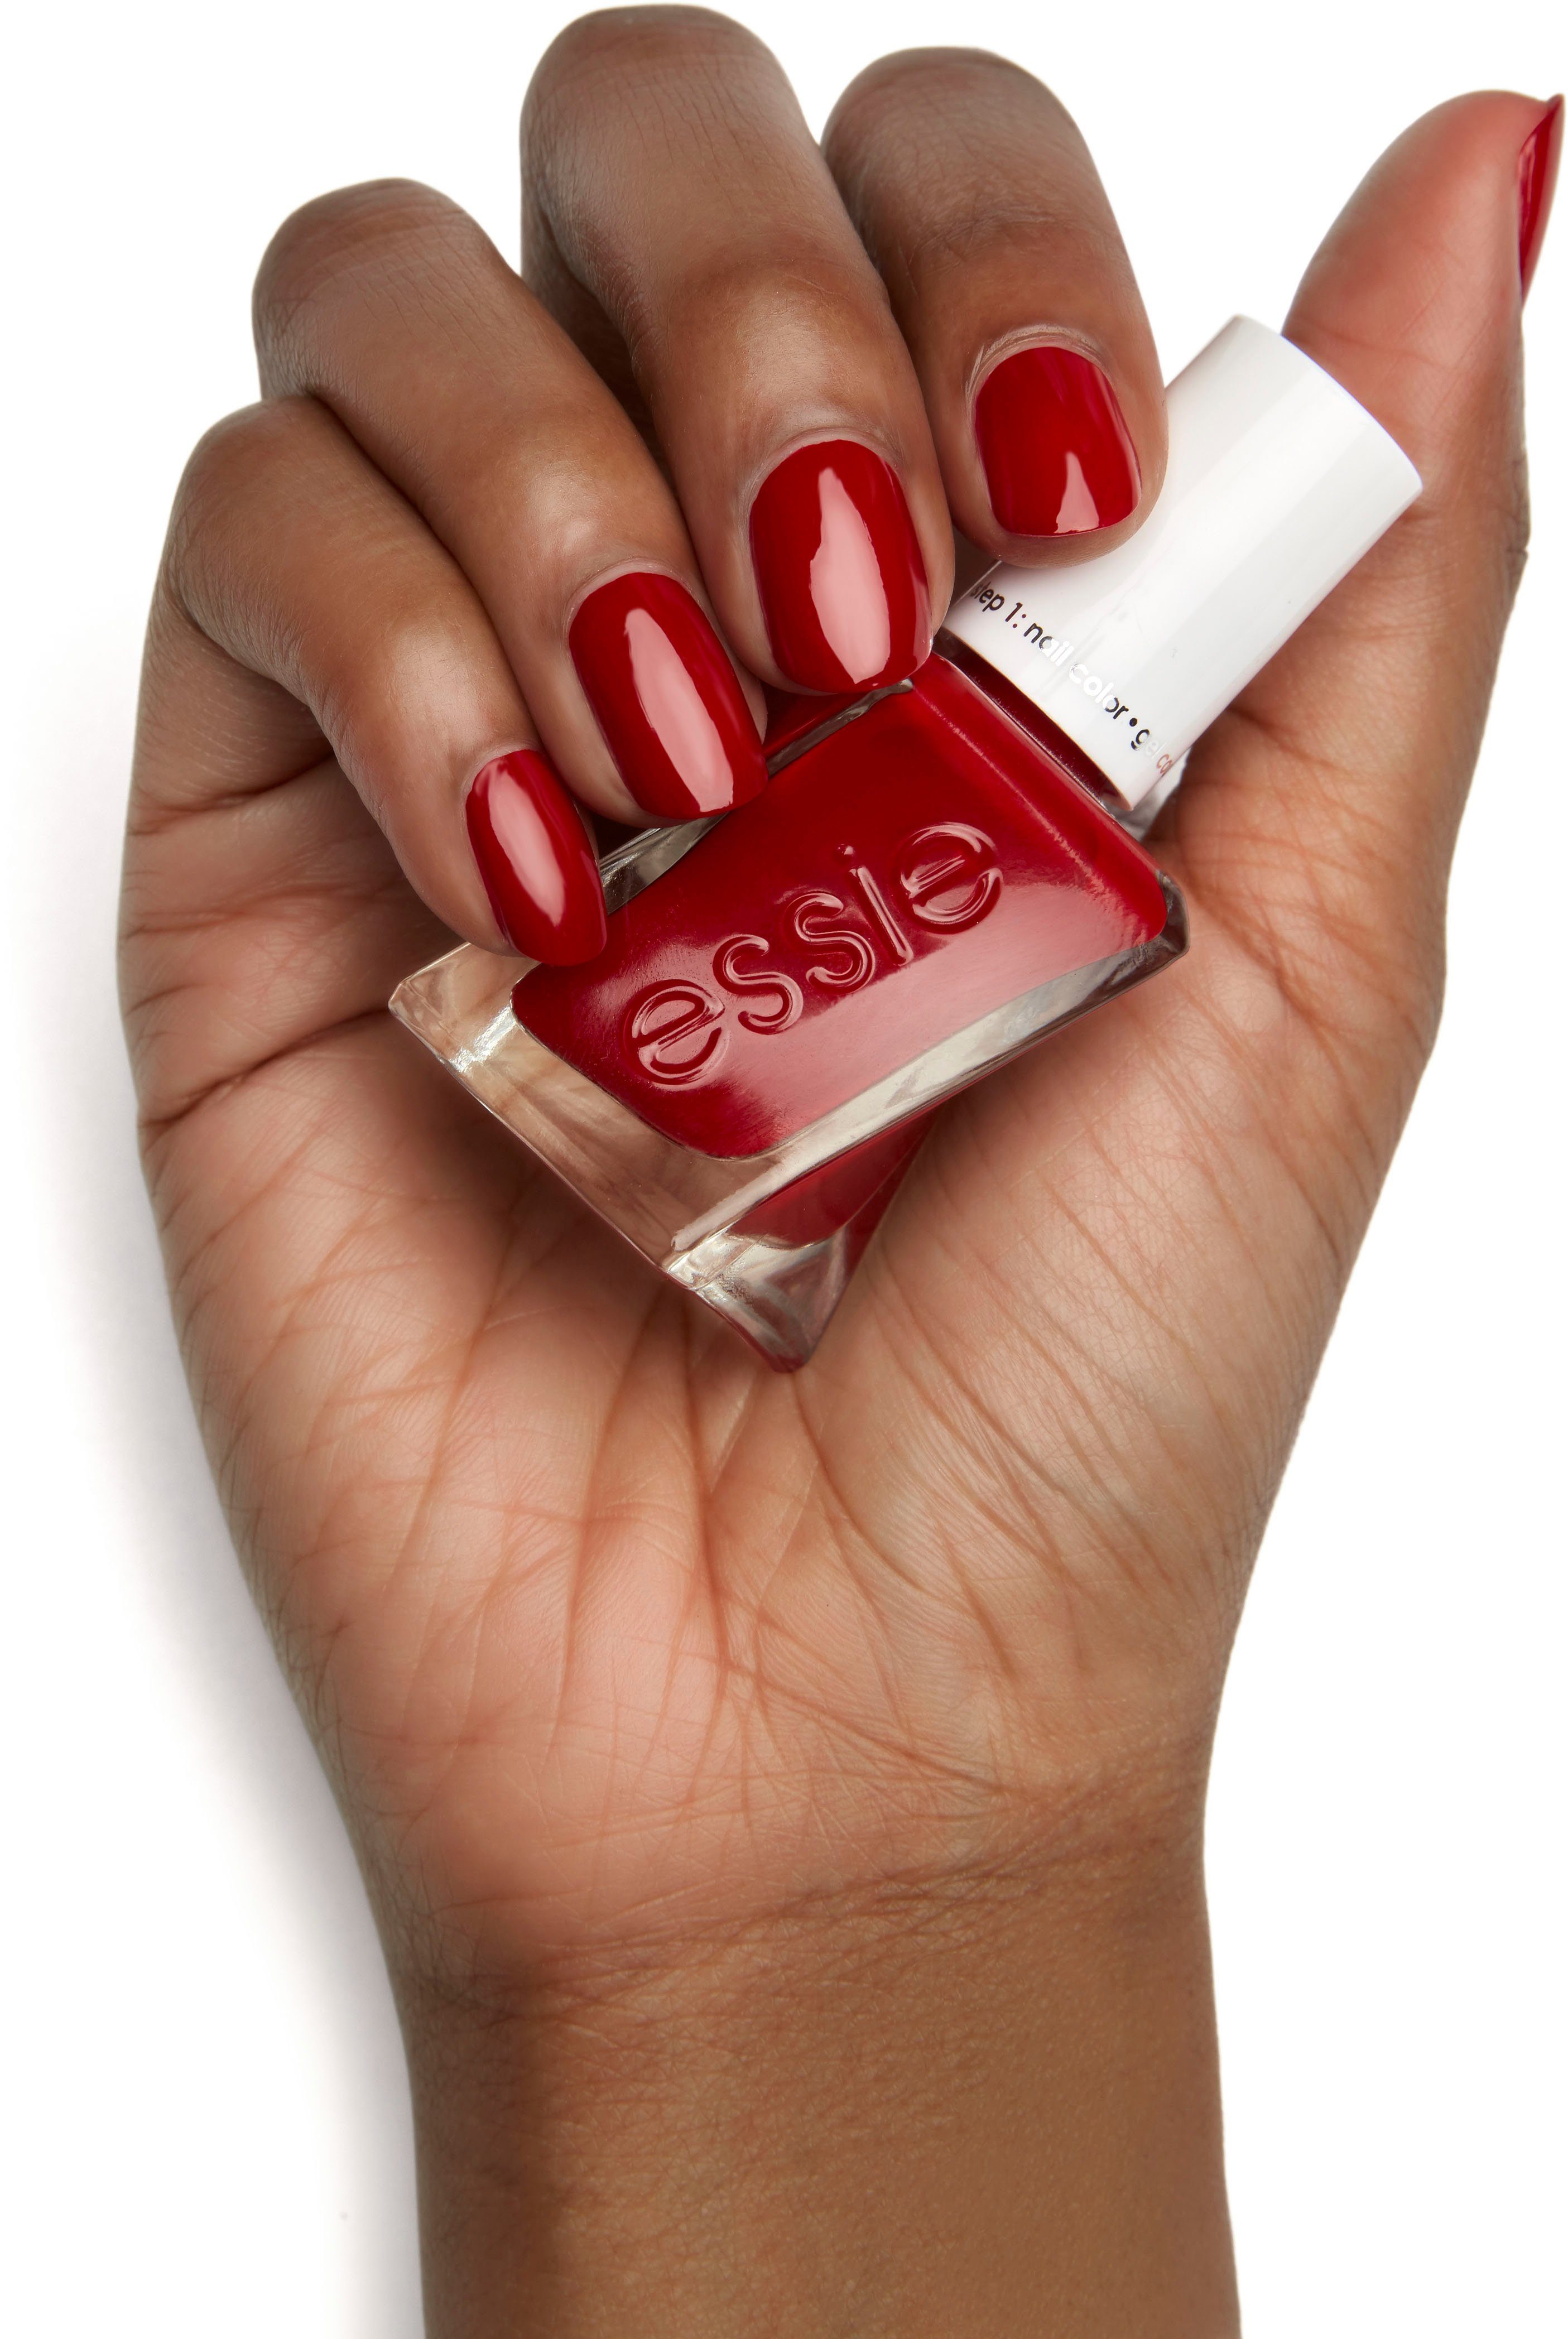 bubbles Gel-Nagellack Nr. only essie Couture Rot Gel 345